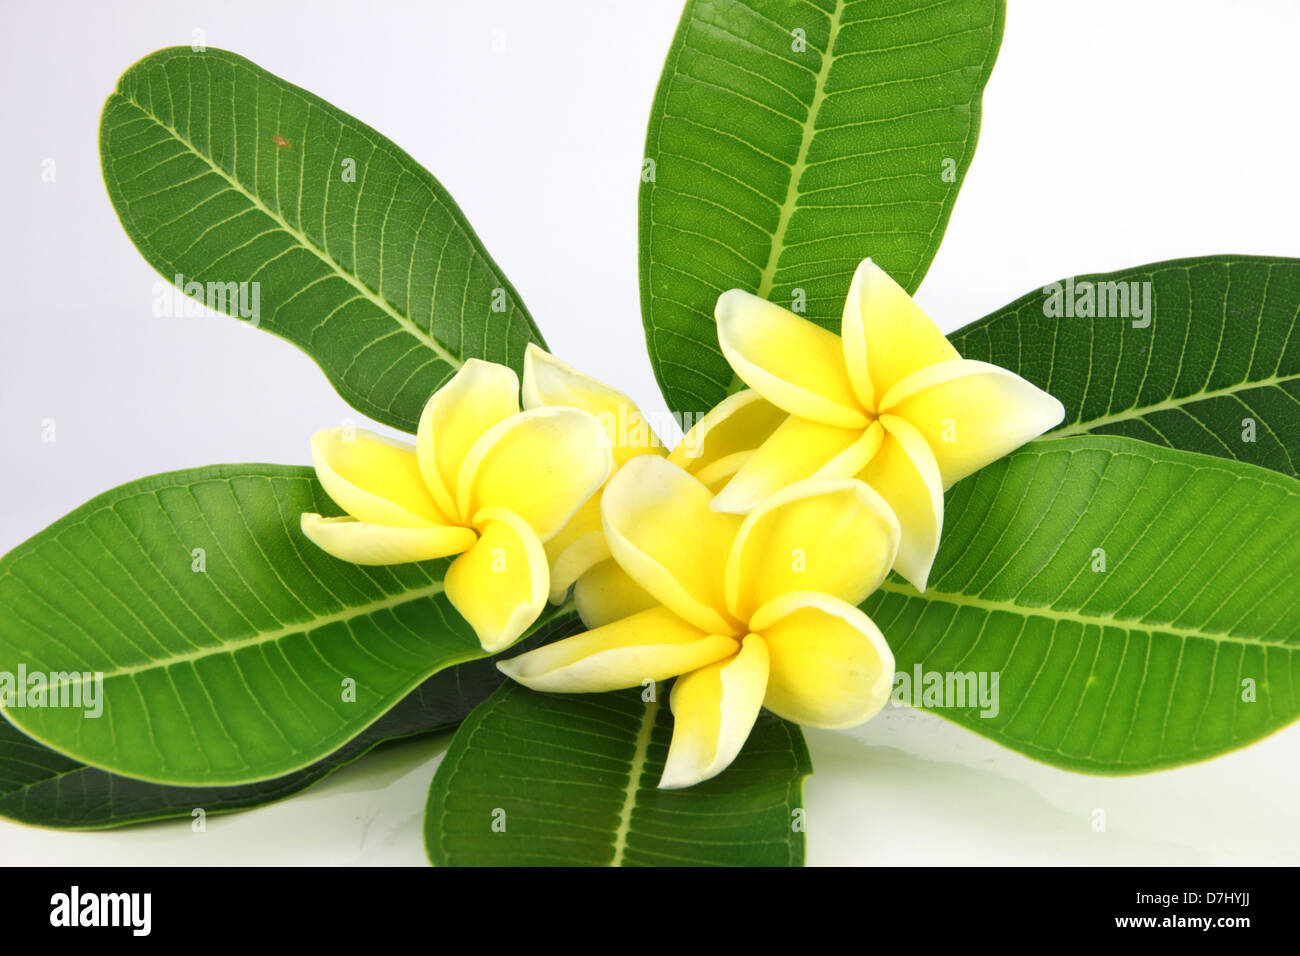 Yellow frangipani colors and leaves on a white background. Stock Photo